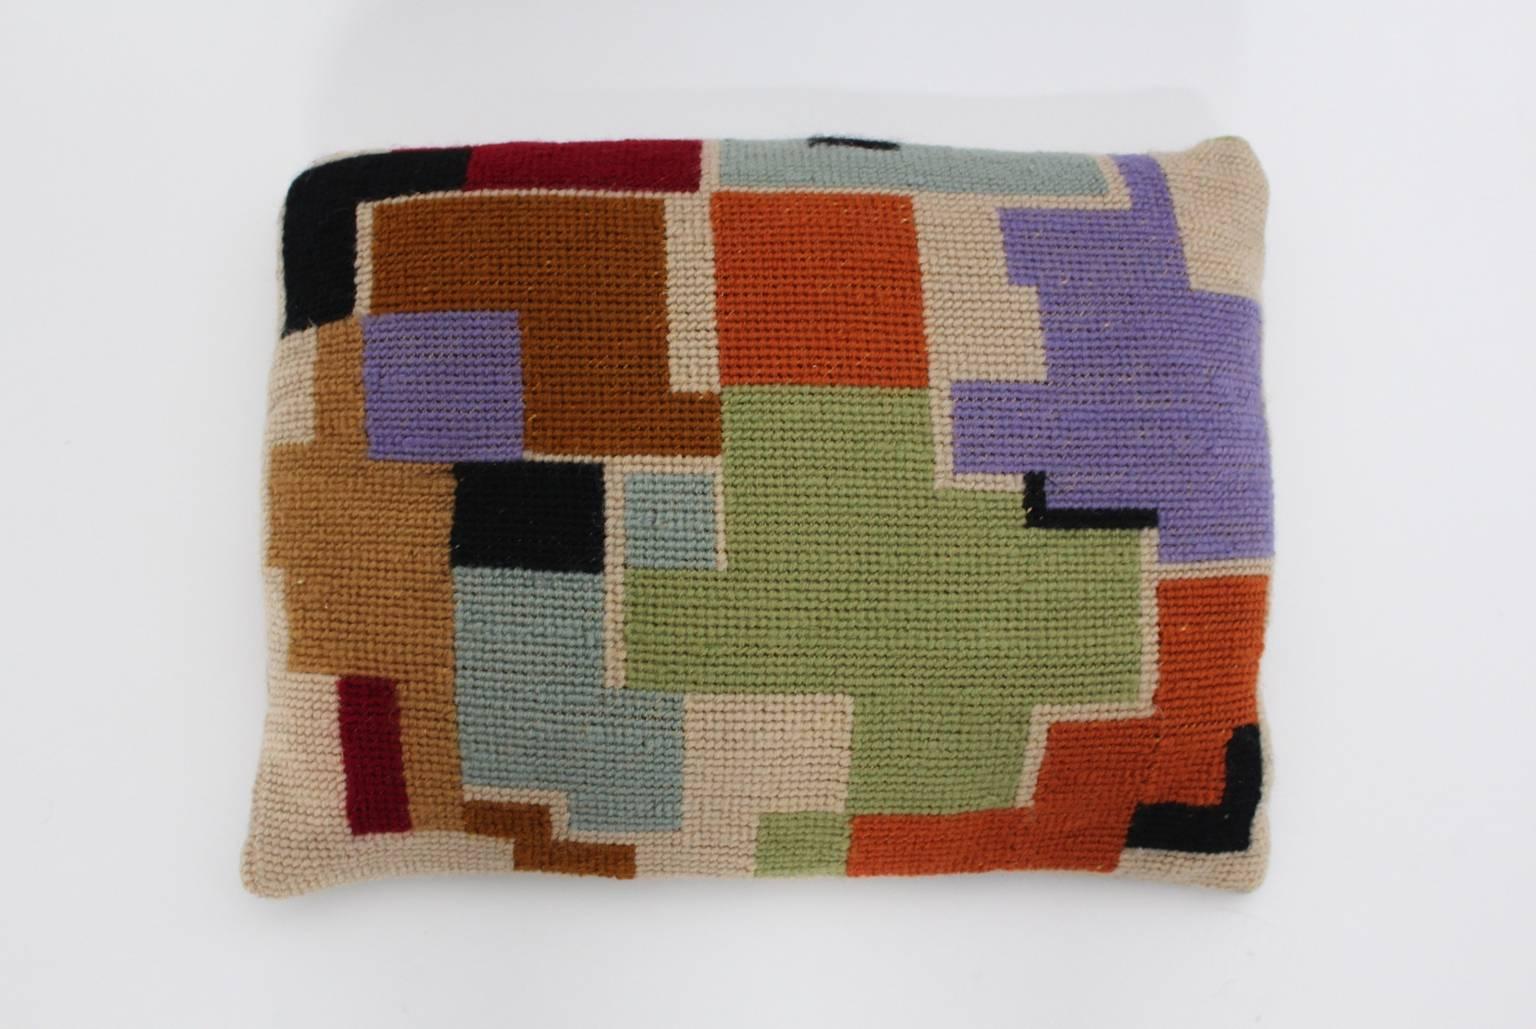 The vintage pillow features a multicolored embroidery with Bauhaus geometric design and comes with an insert.
Both sides show different geometric pattern colored in black, green, lilac, light blue, brown, ivory, orange and red.

The original vintage